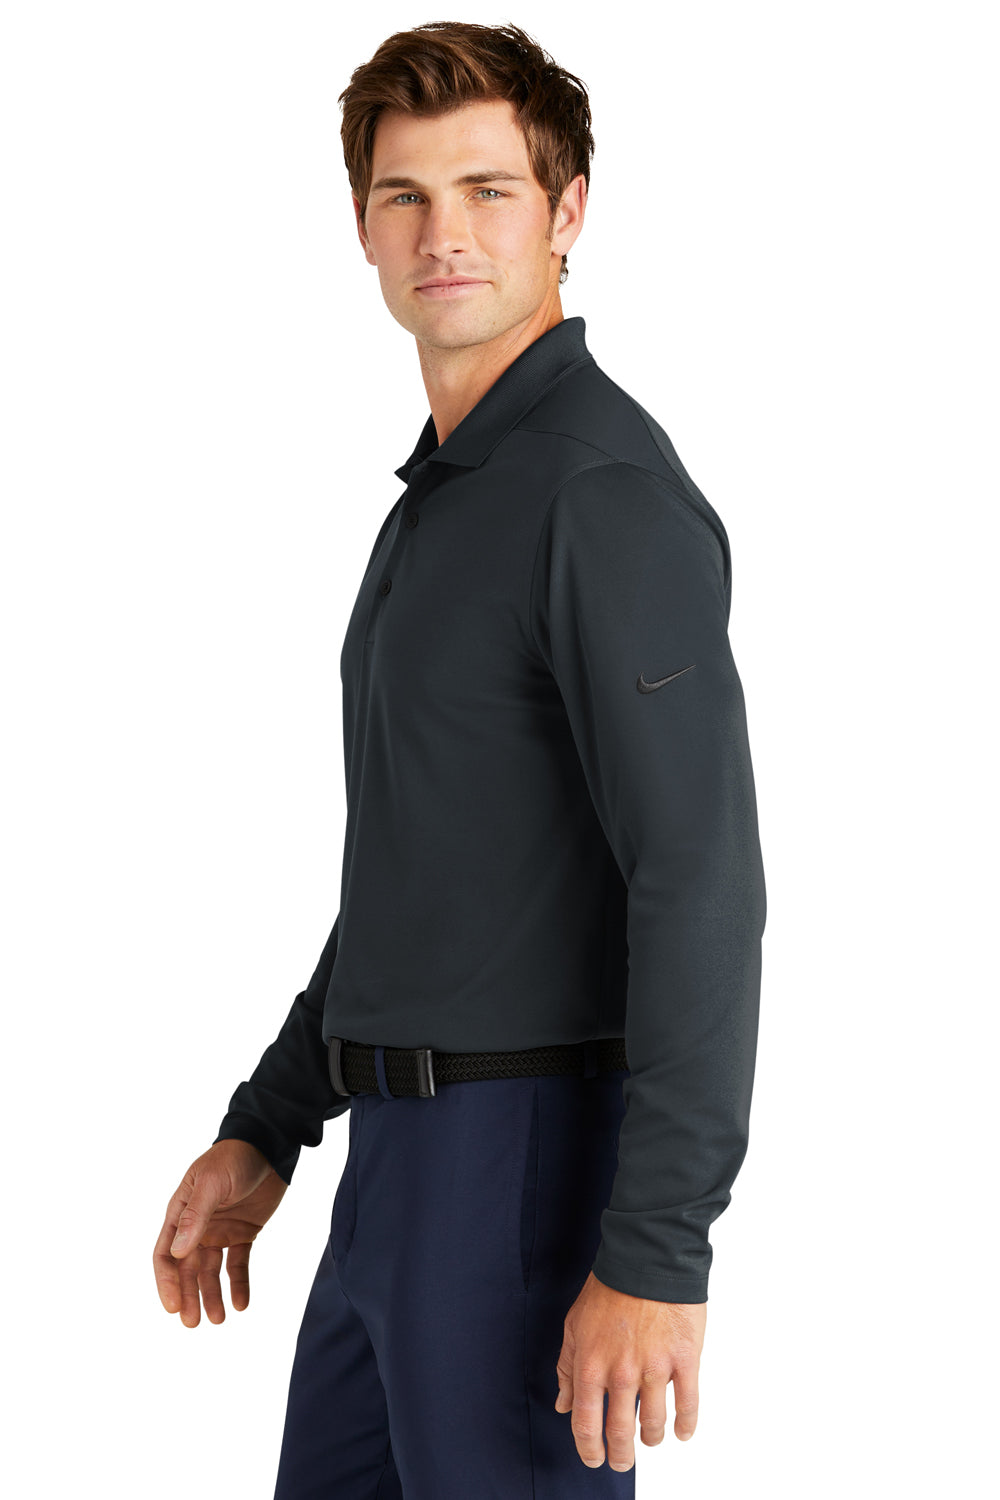 Nike NKDC2104 Mens Dri-Fit Moisture Wicking Micro Pique 2.0 Long Sleeve Polo Shirt Anthracite Grey Model Side